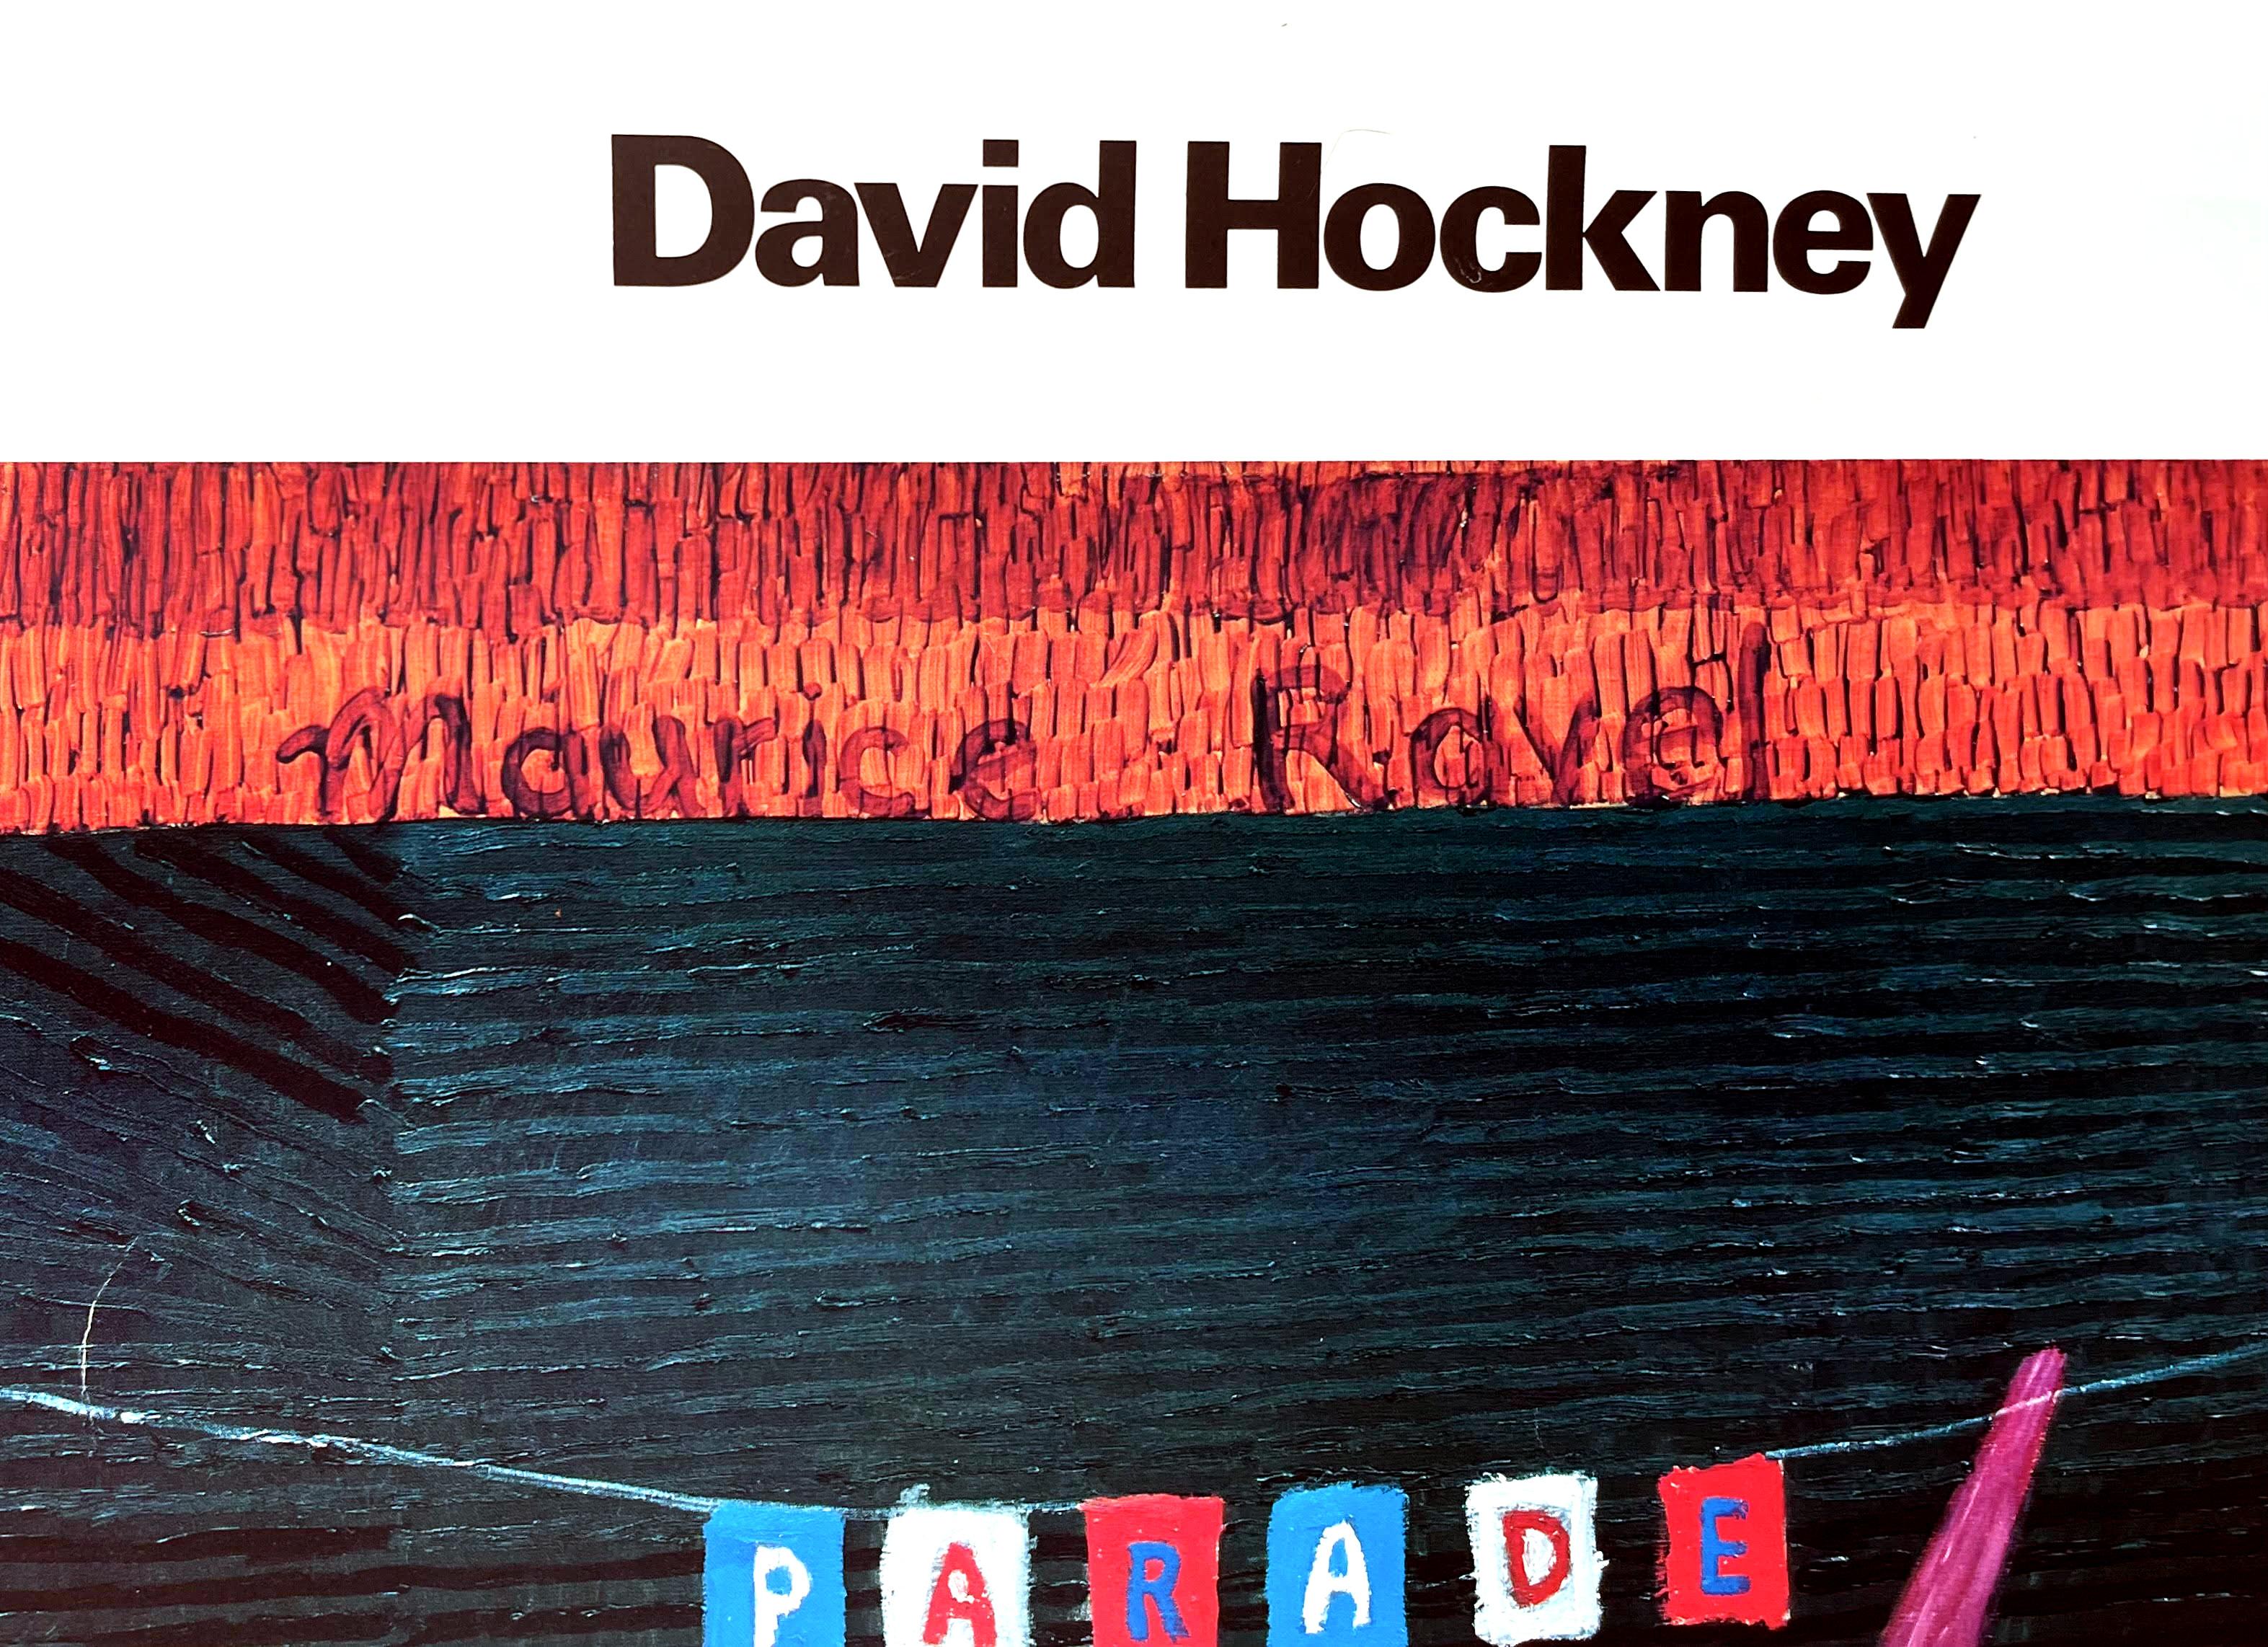 Paintings and Drawings for Parade poster (Hand Signed by David Hockney) For Sale 3